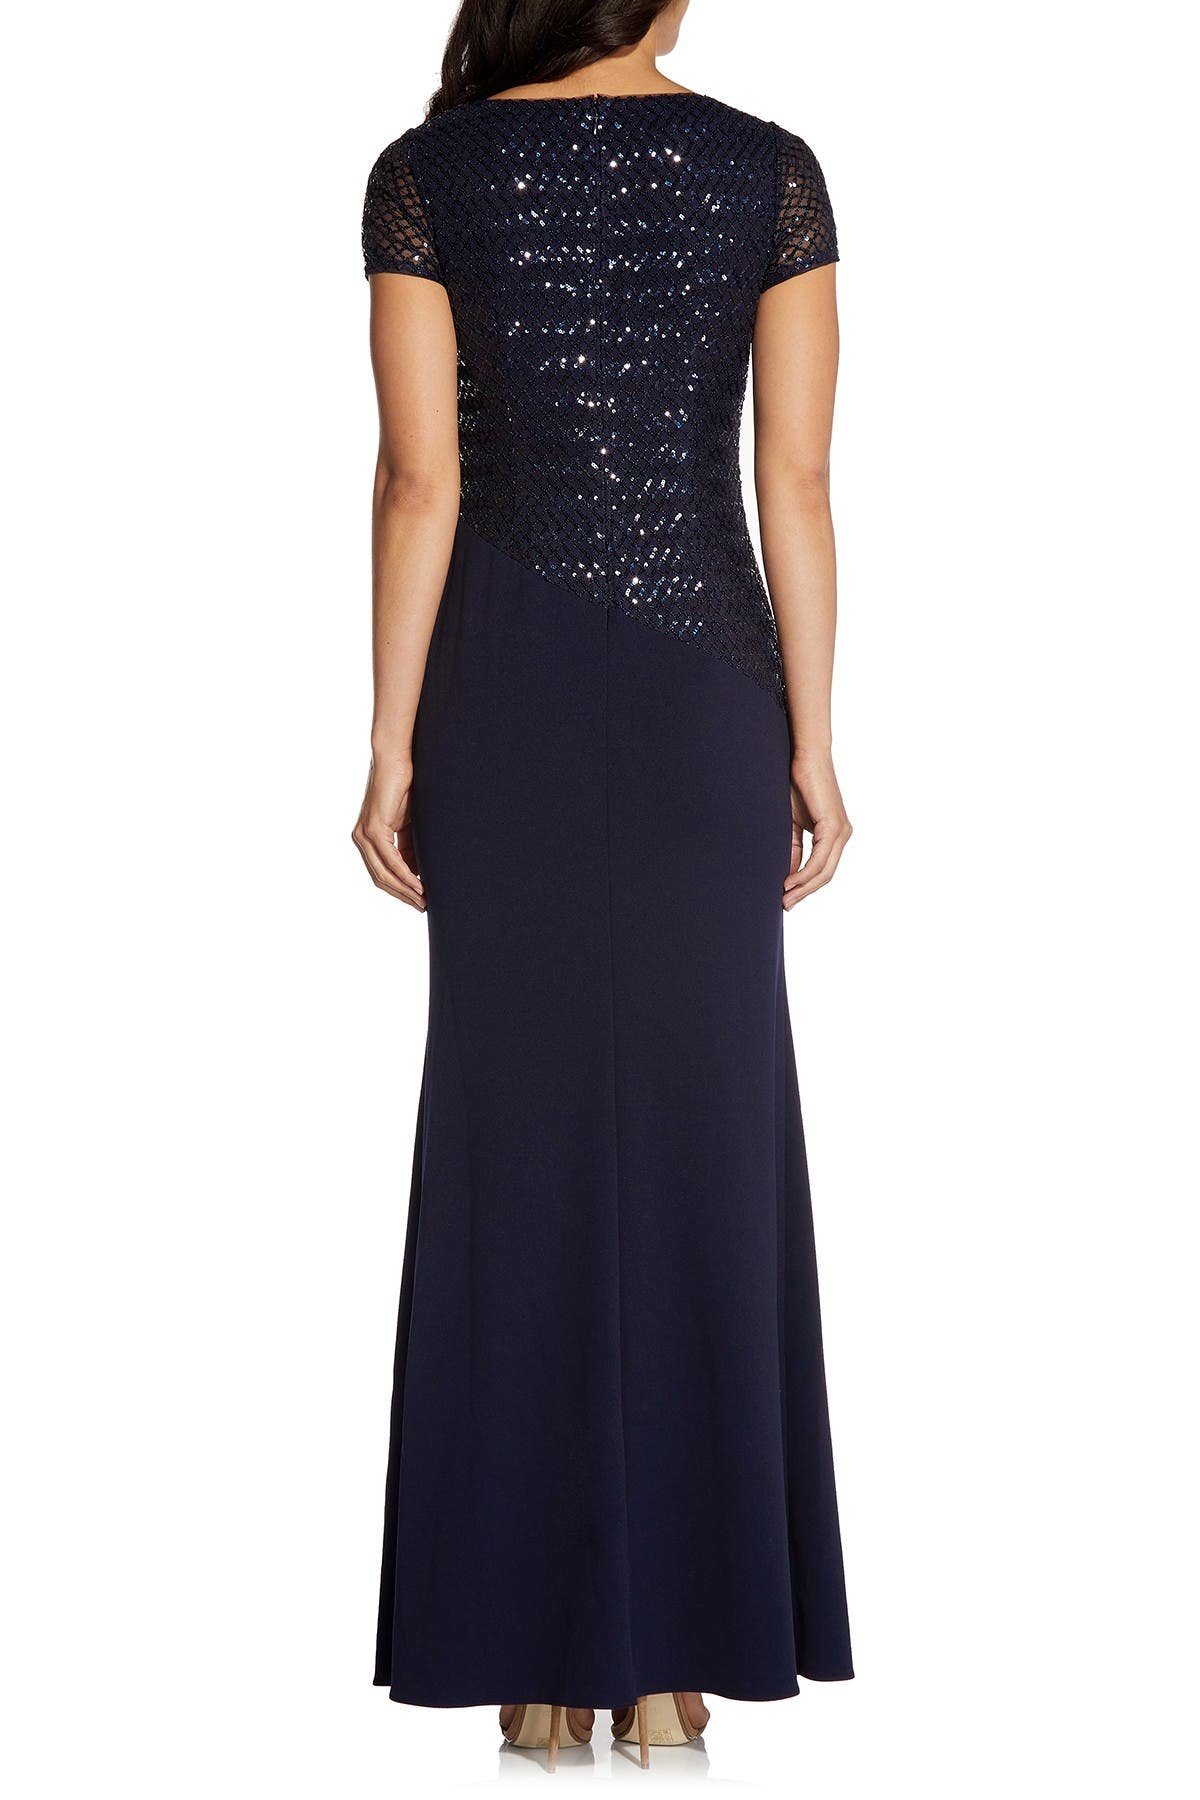 Adrianna Papell Sequin Crepe Dress In Navy1